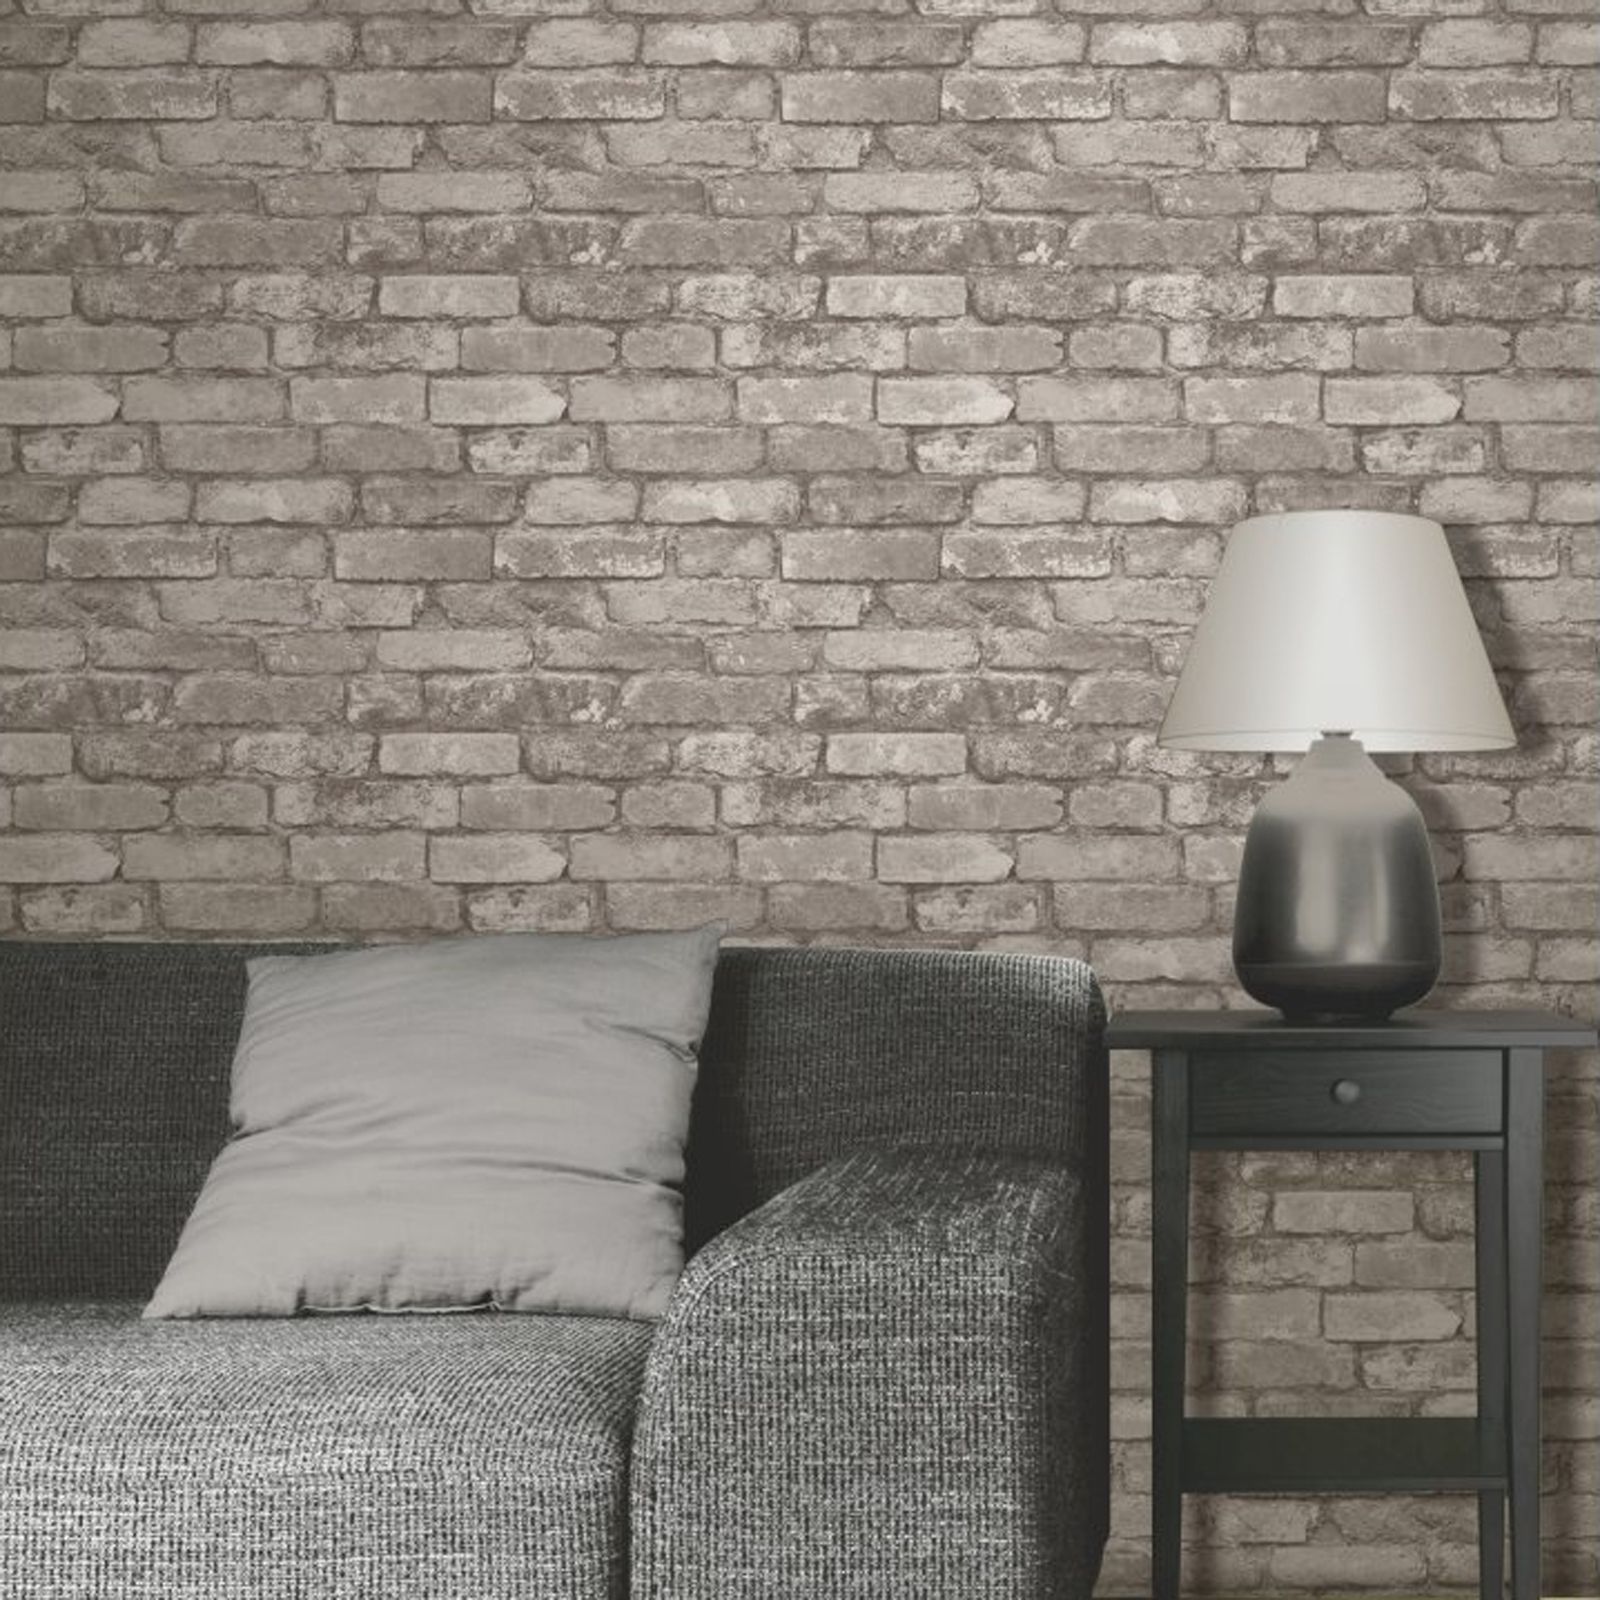 Details About Rustic Brick Effect Wallpaper 10m Silver Grey New